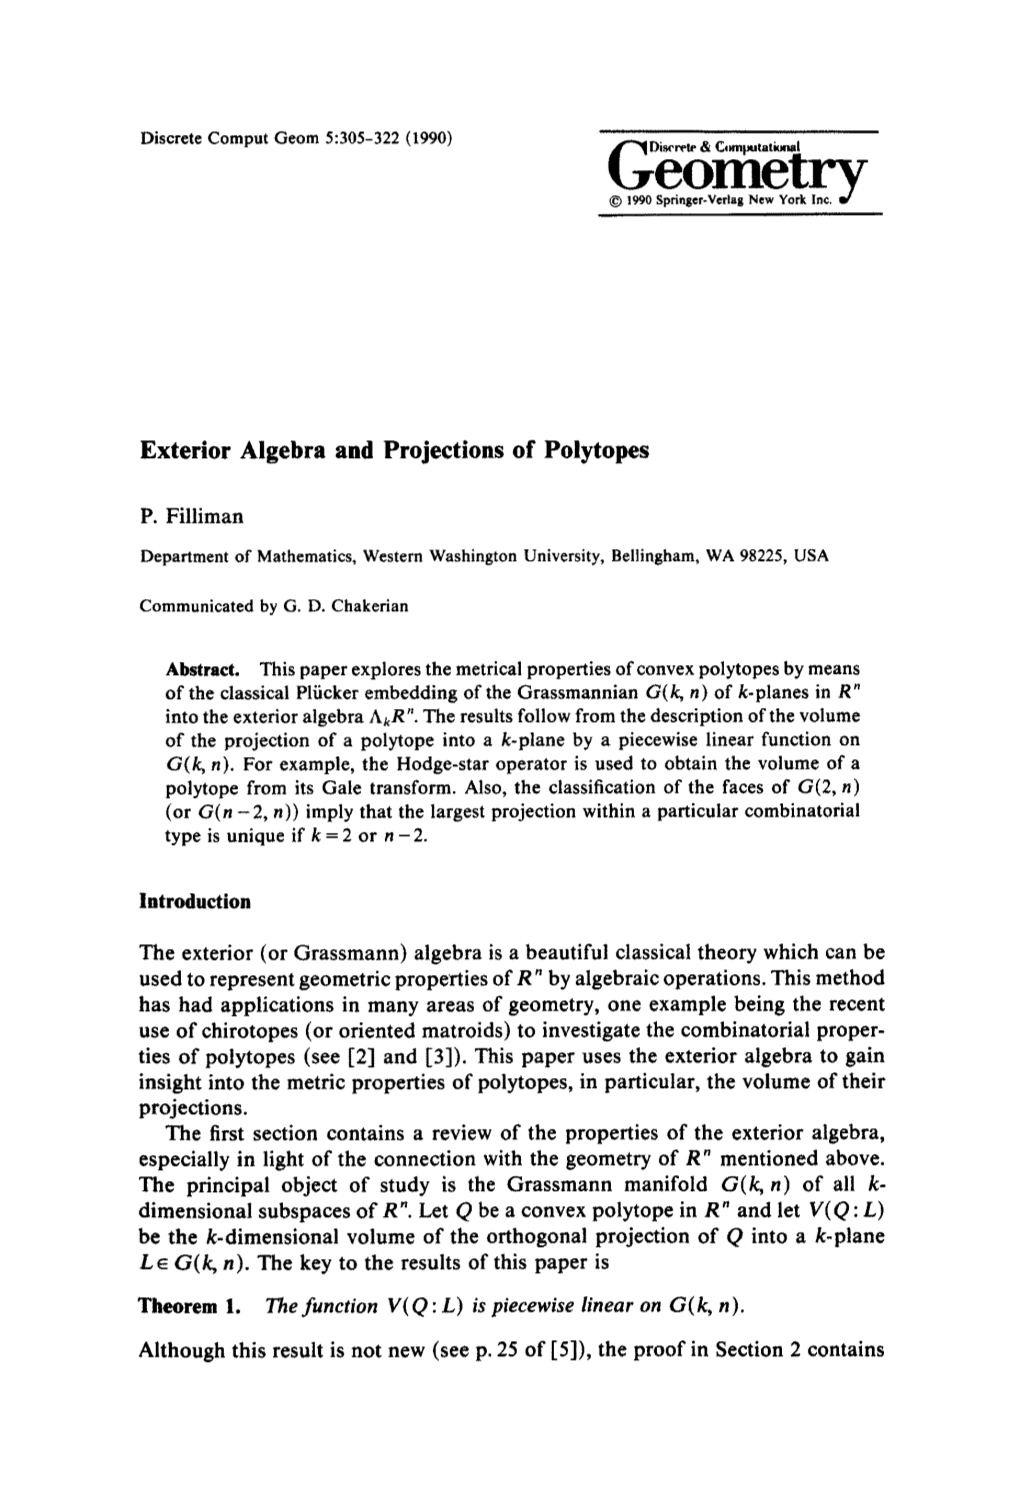 Exterior Algebra and Projections of Polytopes